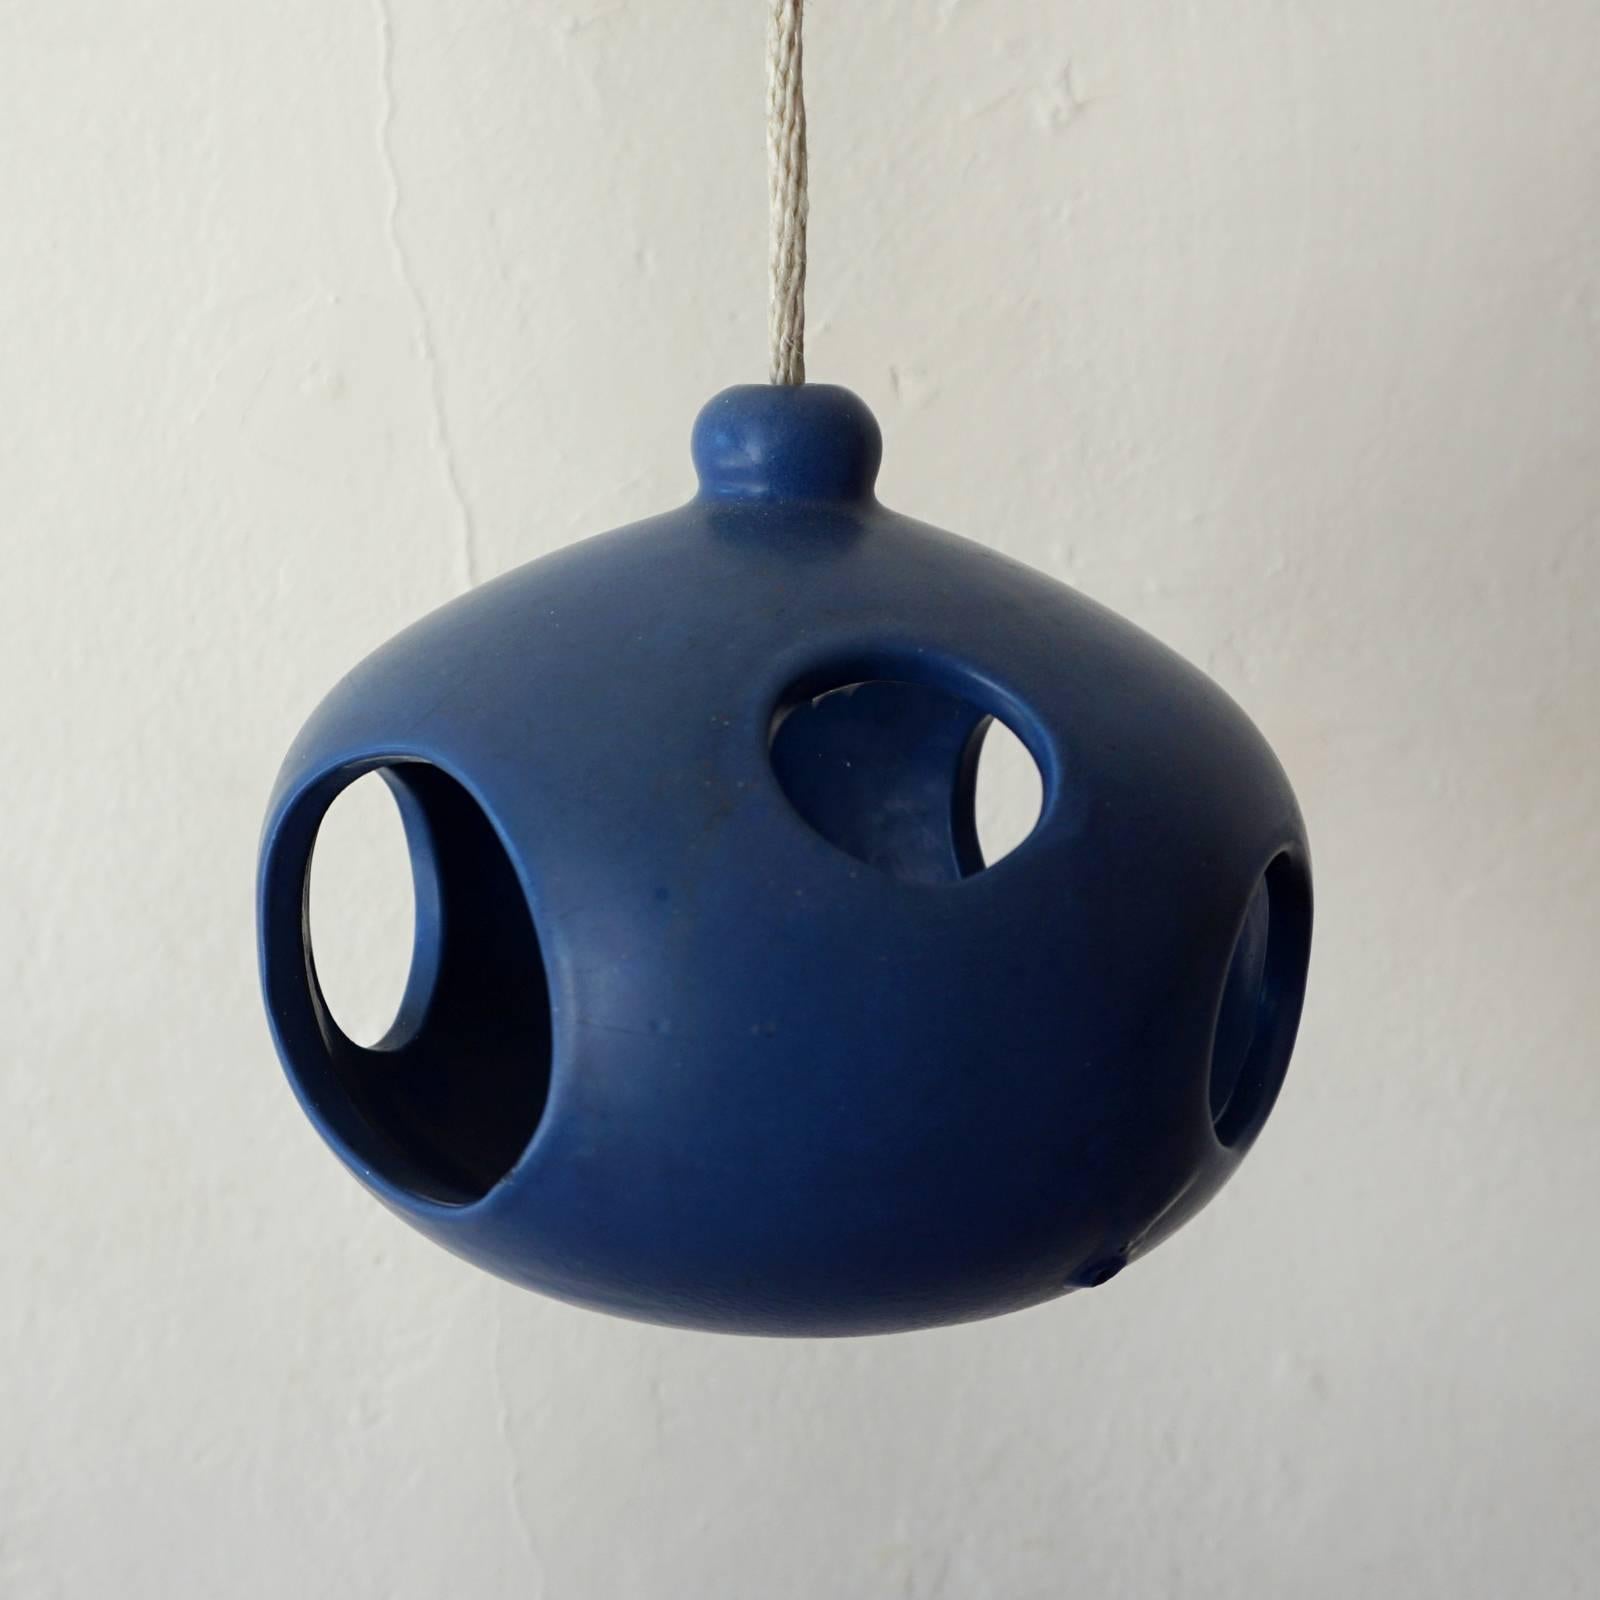 Hanging lantern by Aurilla Doener for Architectural Pottery. 

The lantern was included in the 1964 Architectural Pottery catalog and exhibited in California Design 9 (1965) at the Pasadena Museum of Art in a cluster (see catalog